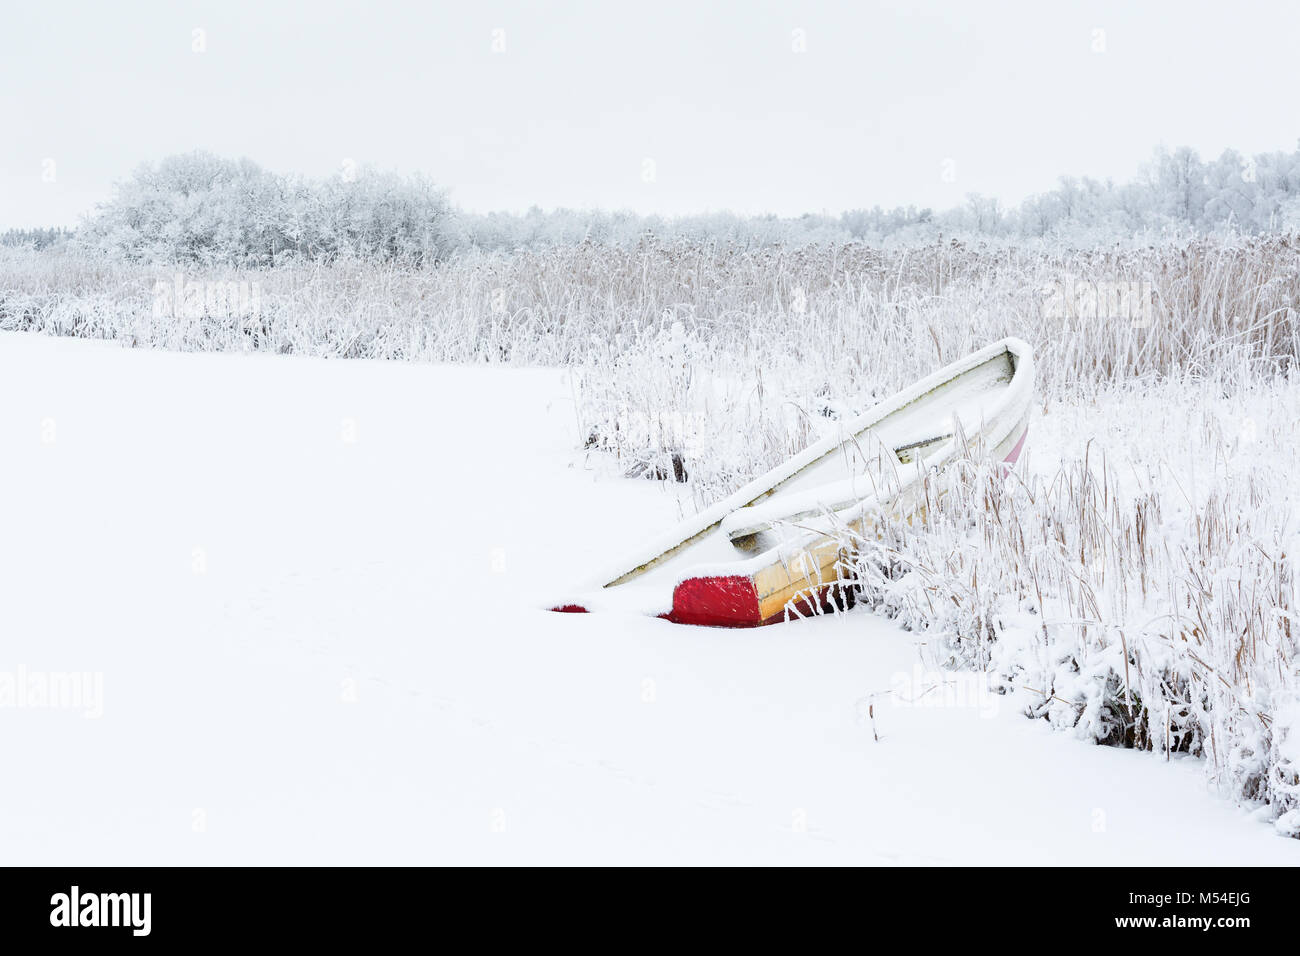 Winter landscape with a row boat on the beach Stock Photo